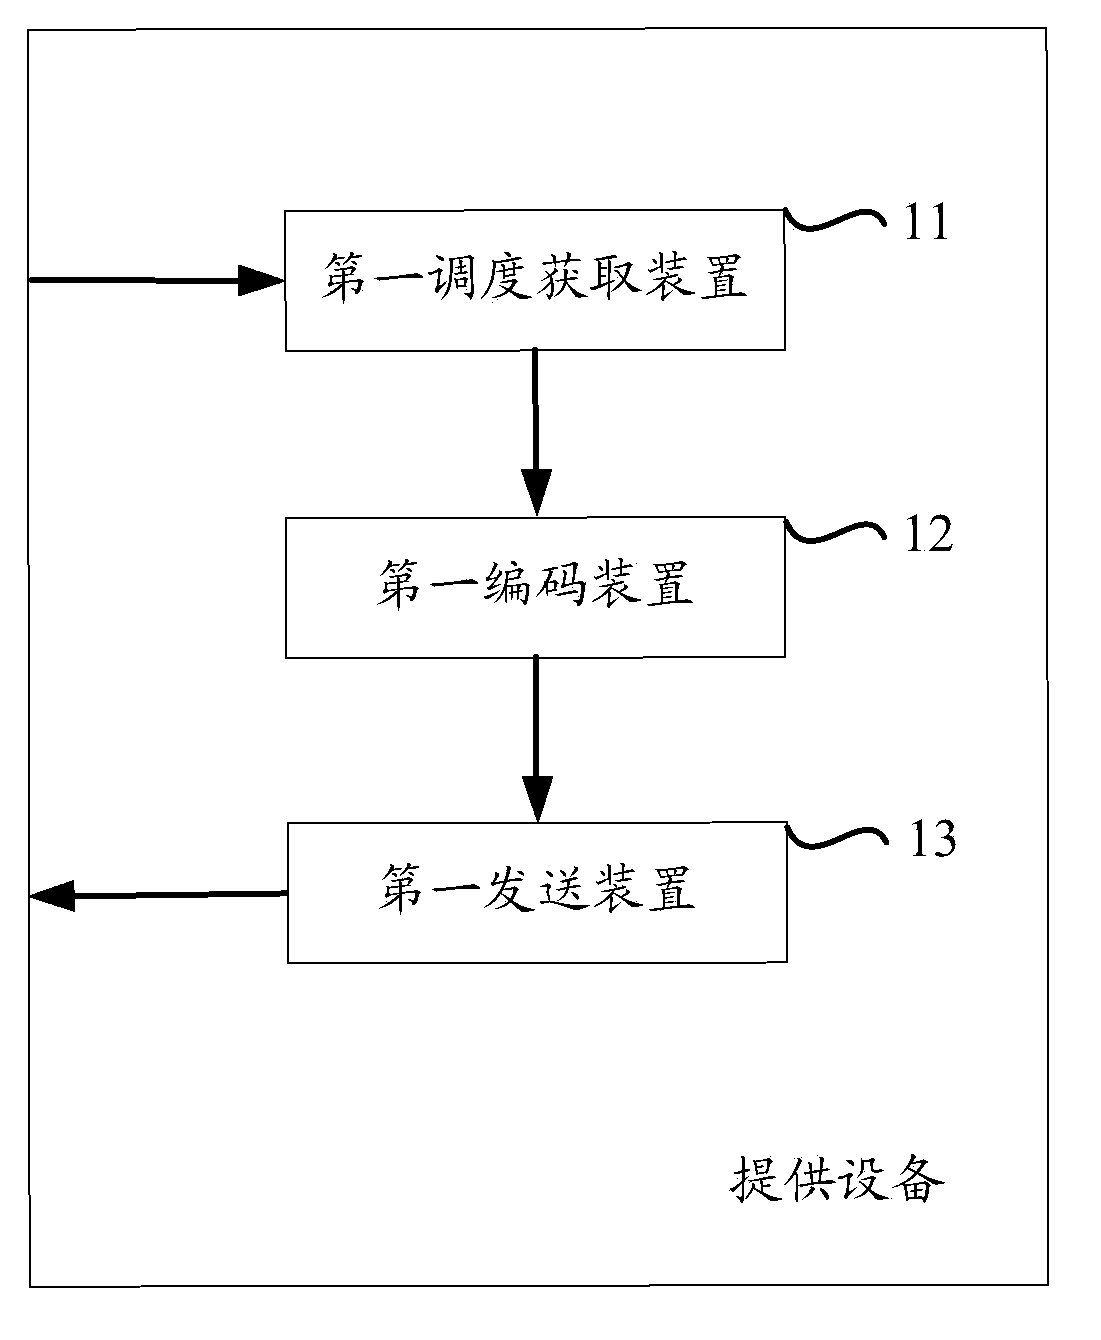 Method and device for providing system information broadcast SIB12 by eNB